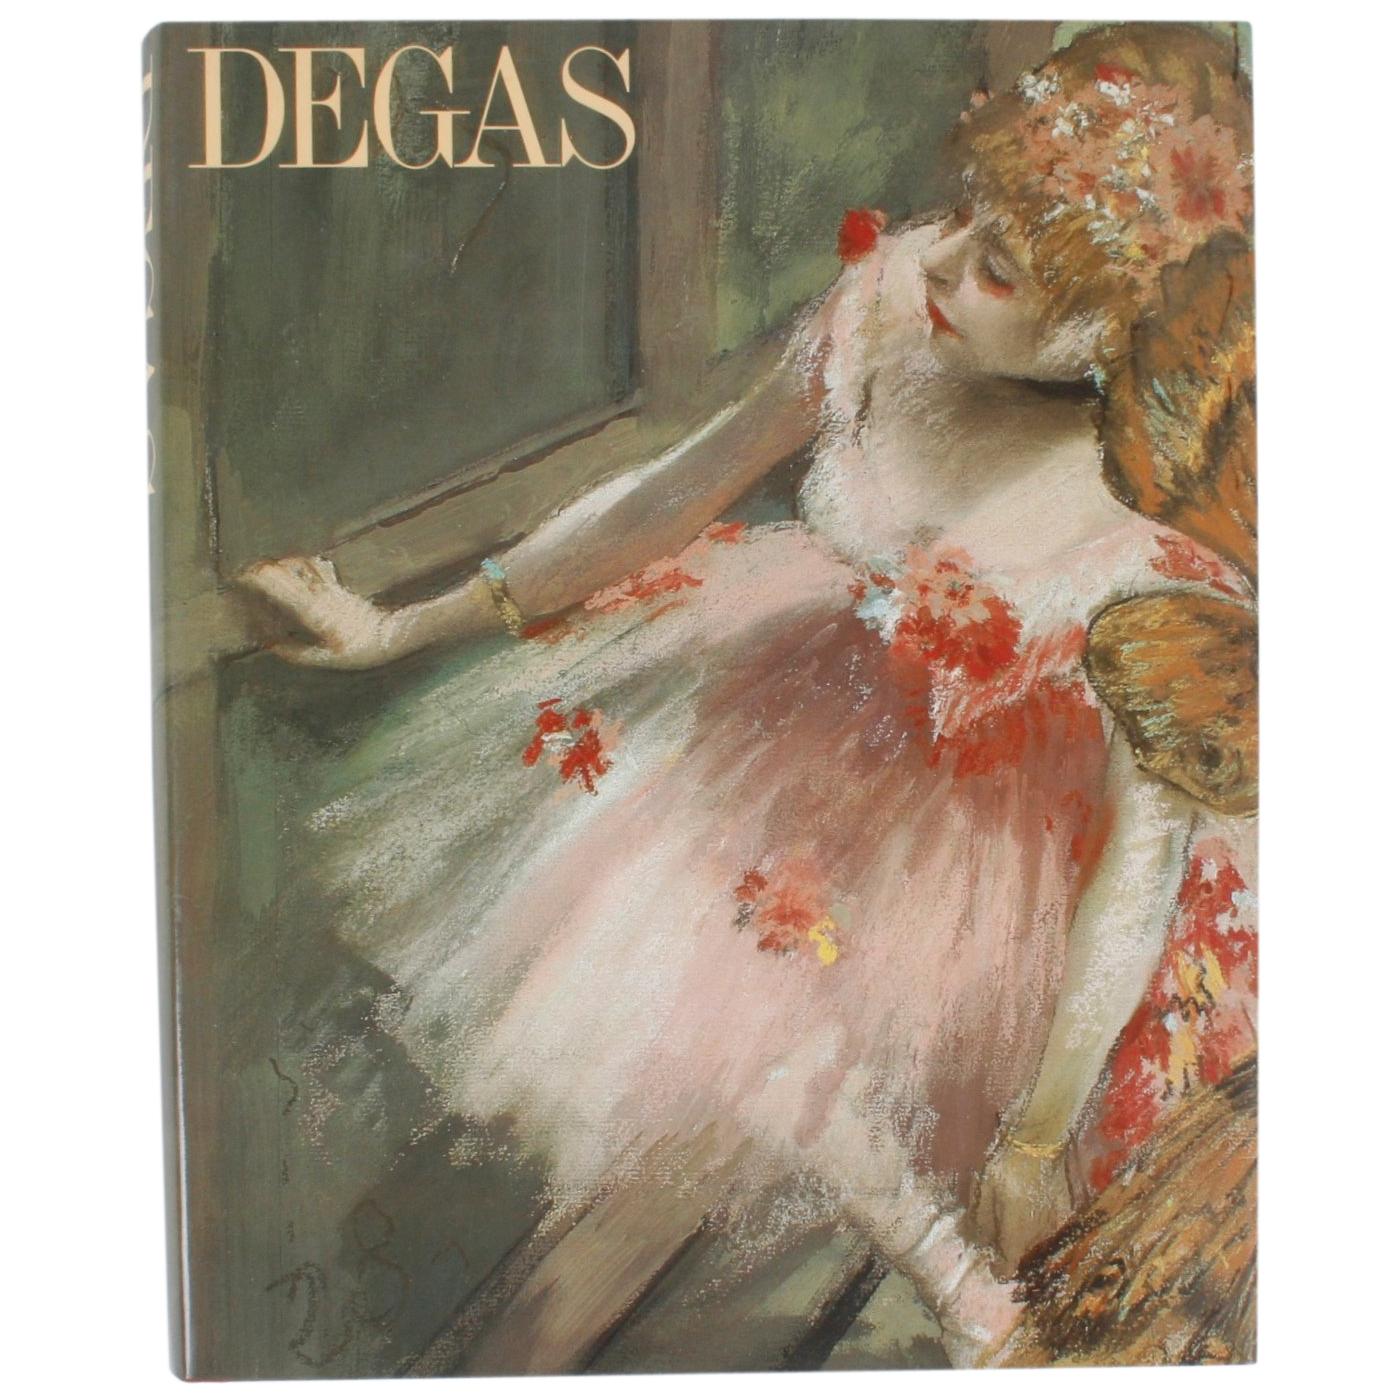 Degas by Robert Gordon and Andrew Forge, Signed and Inscribed Edition